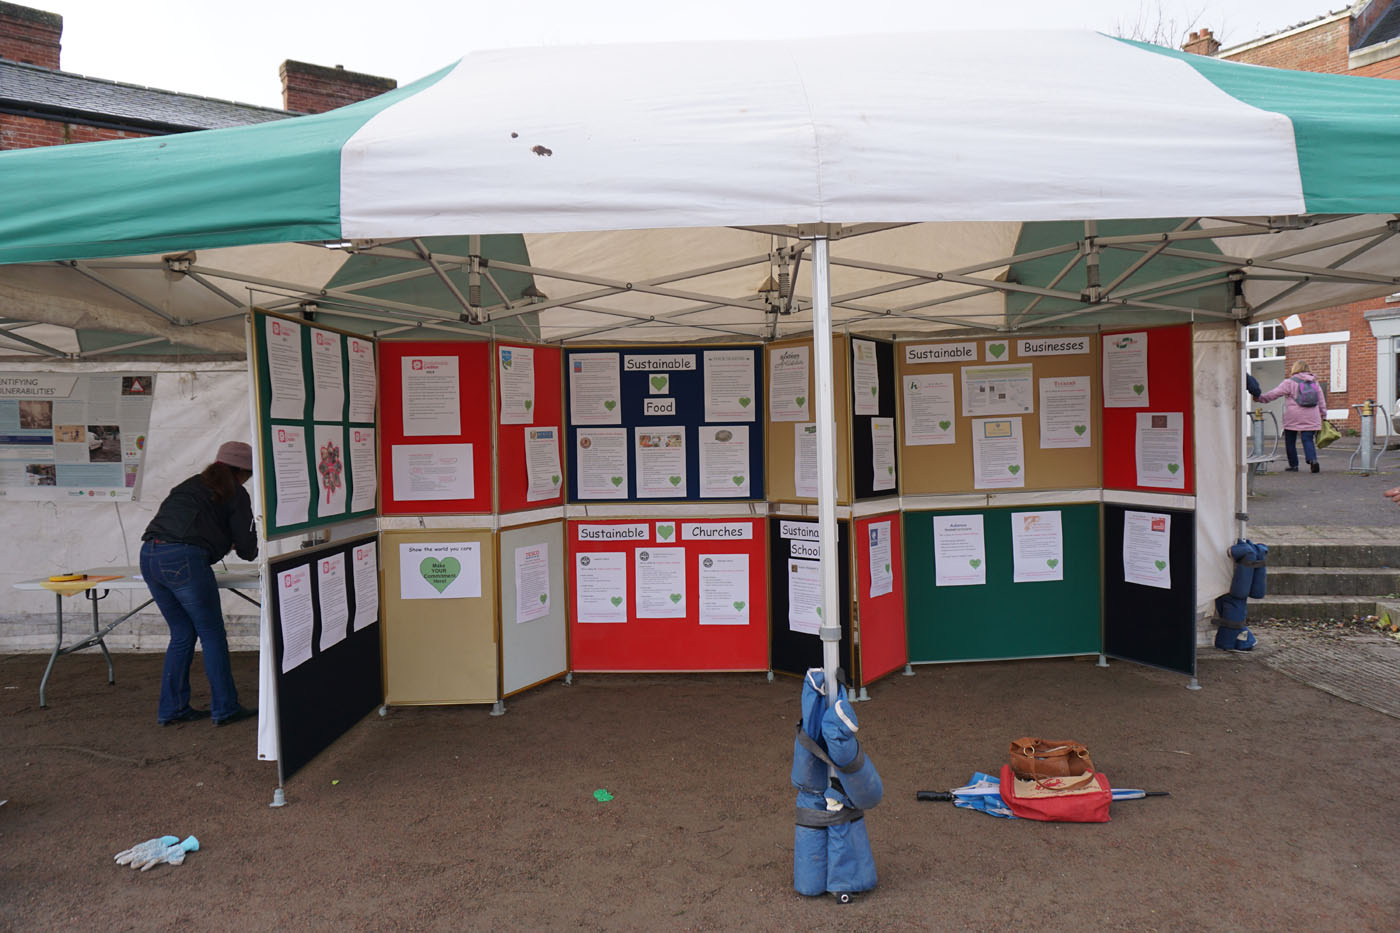 Photograph of display stands for local organisations